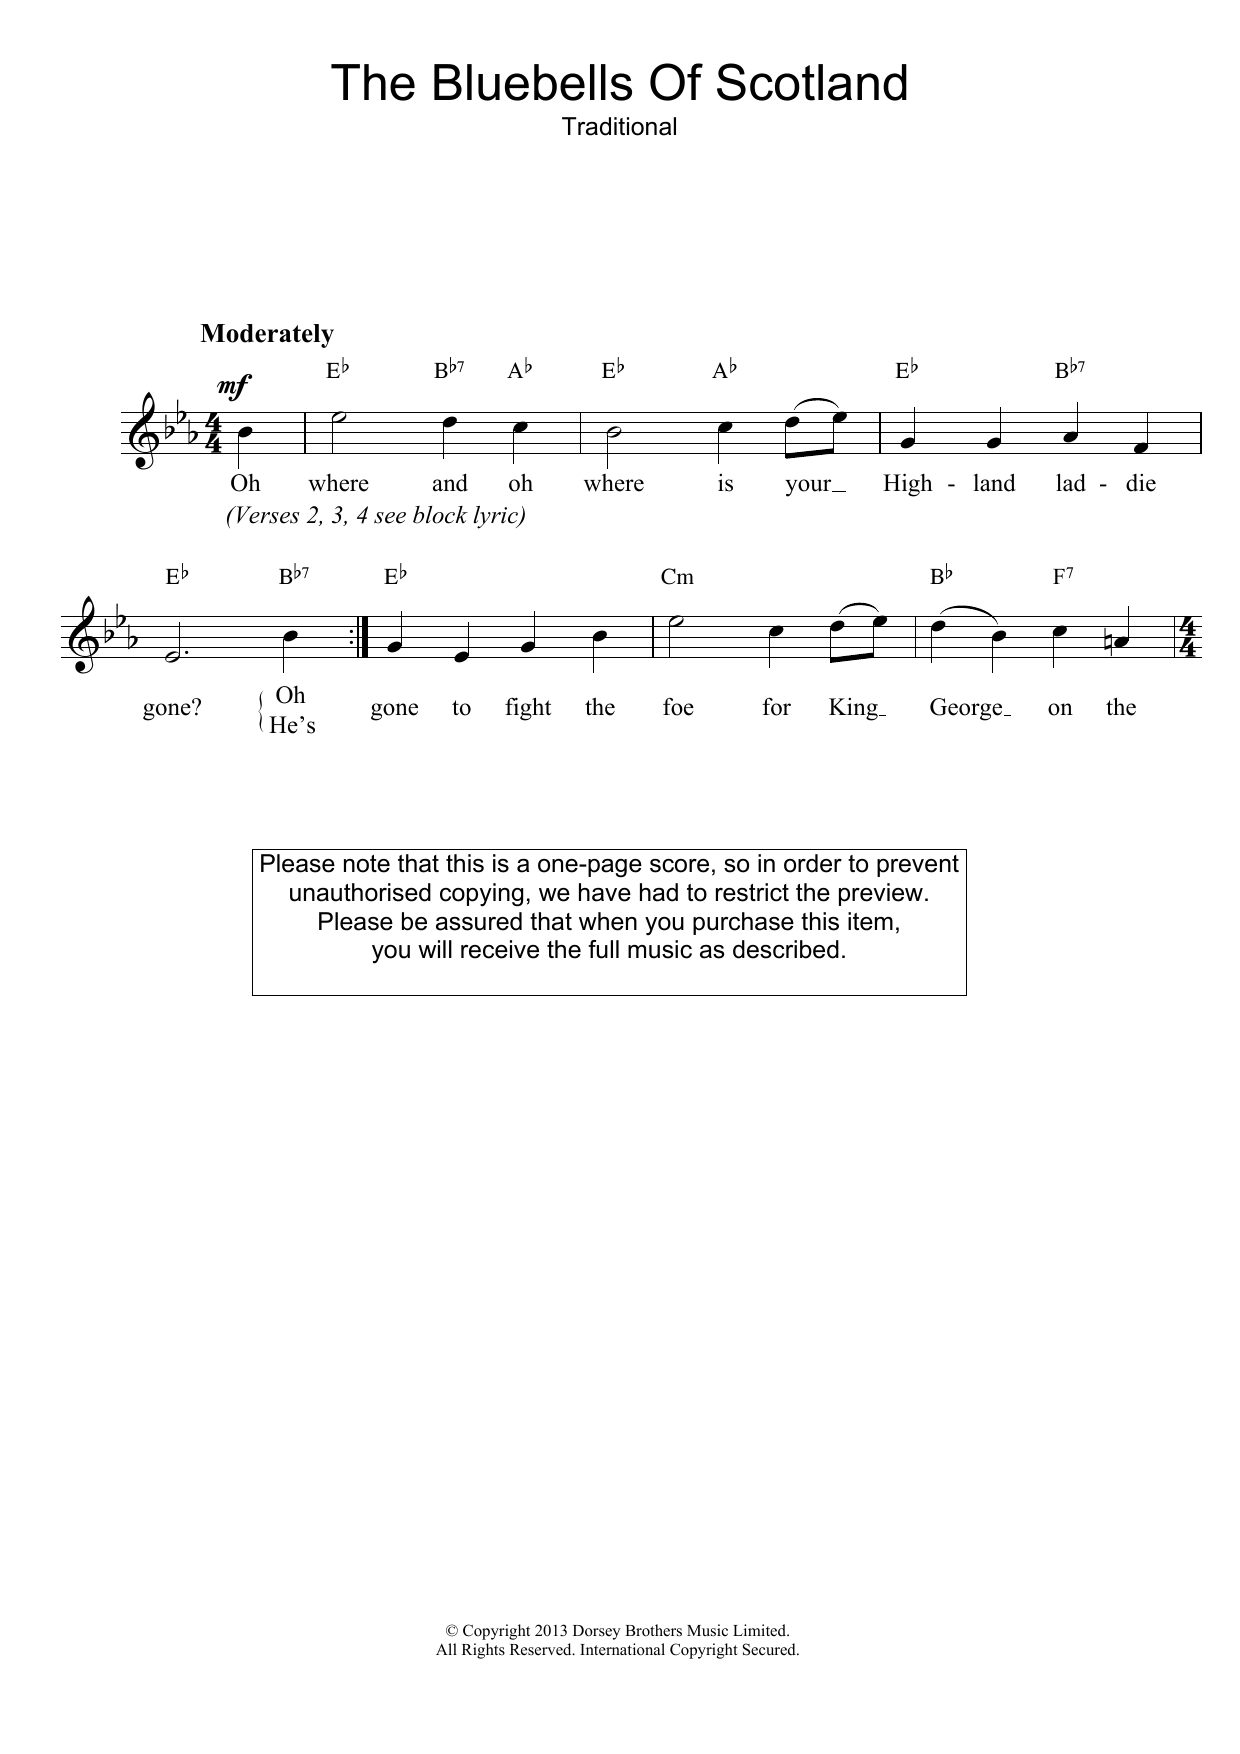 Traditional The Bluebells Of Scotland sheet music notes and chords. Download Printable PDF.